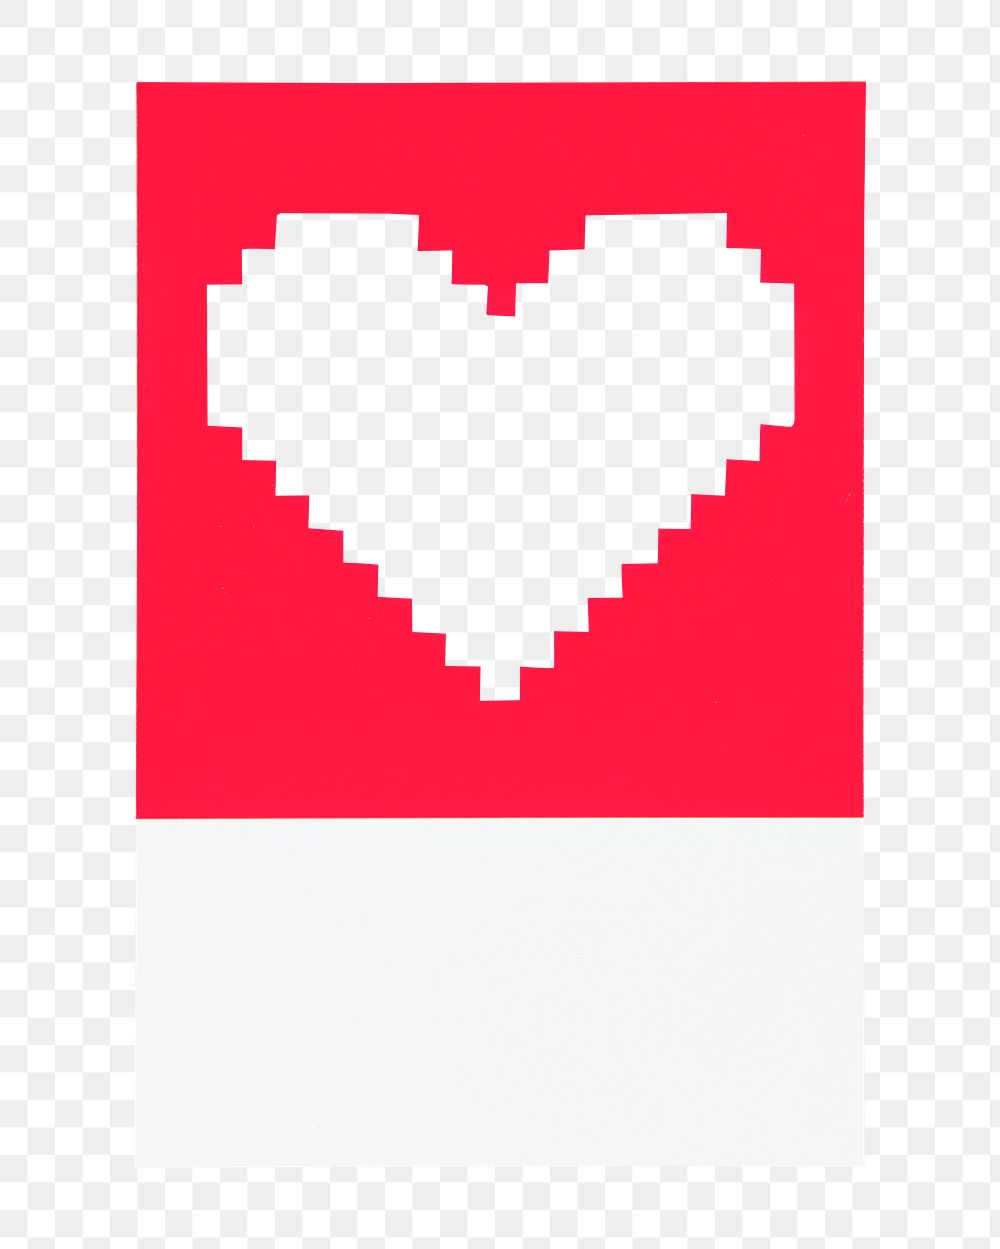 Pixelated heart png 3D illustration in transparent background